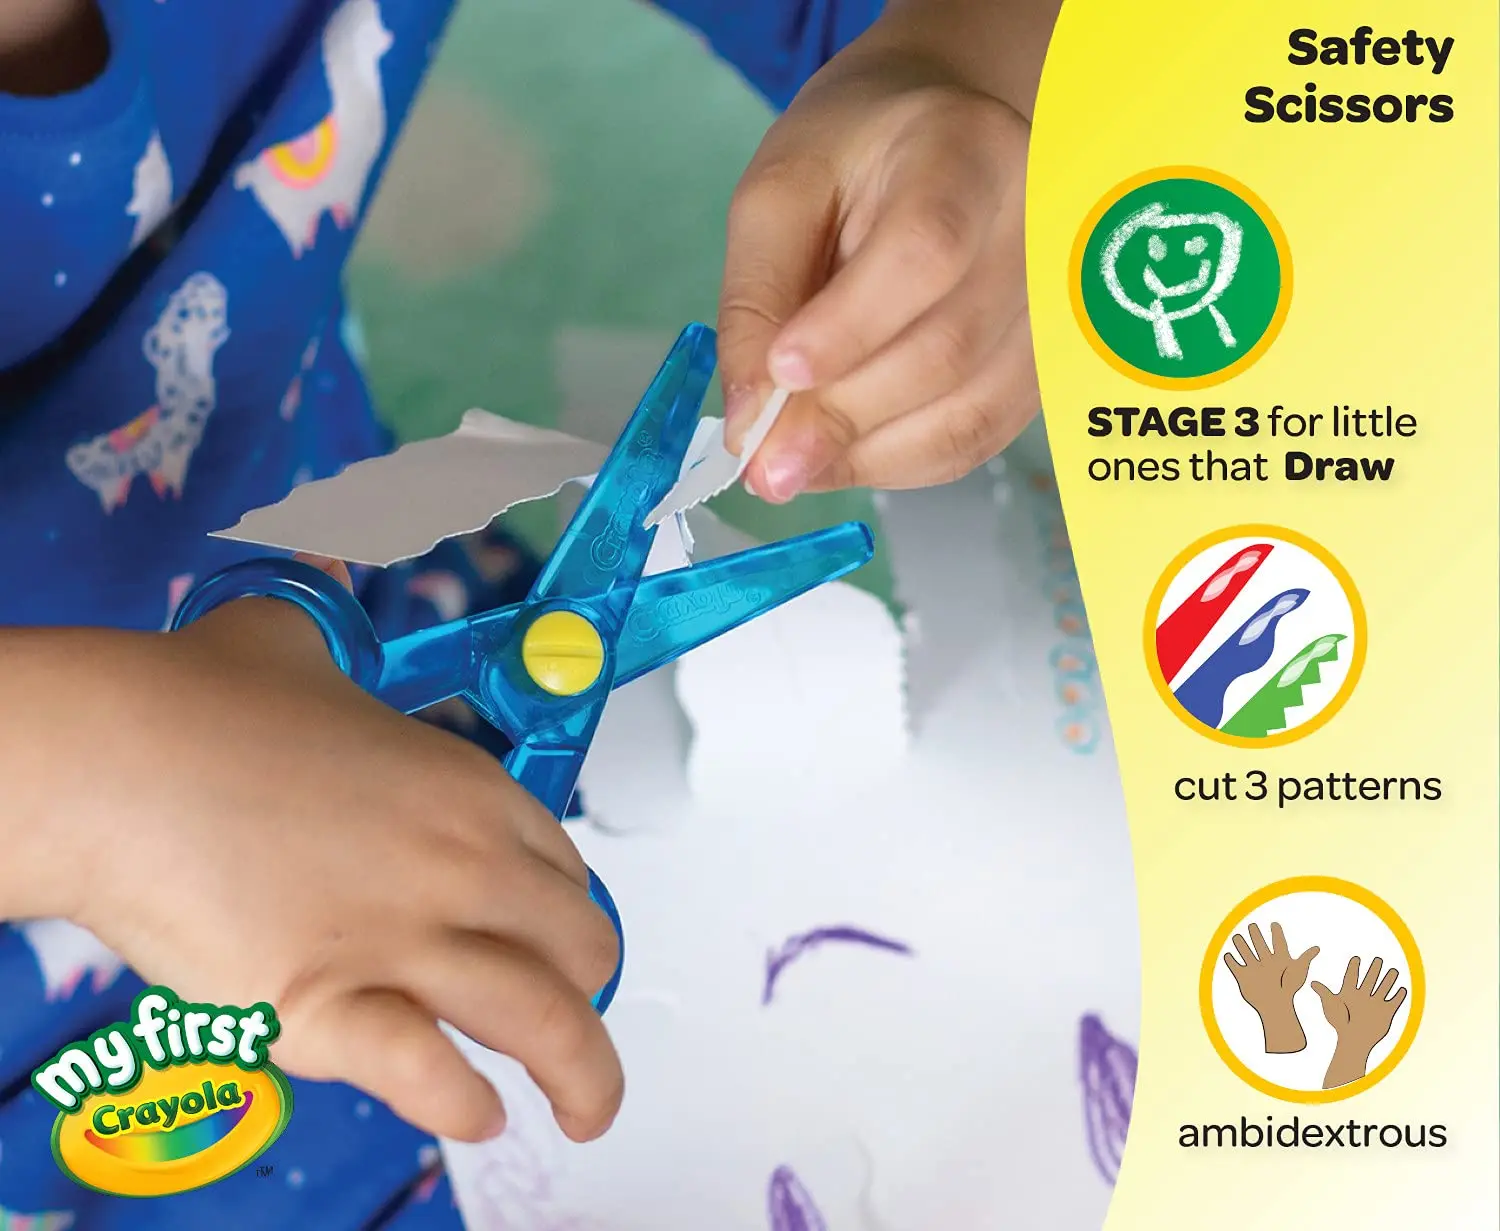 https://ae01.alicdn.com/kf/S81b19fca8cc94217bffb4e45414bc7b31/Crayola-My-First-Safety-Scissors-Toddler-Art-Supplies-3-In-A-Pack-81-1458.jpg